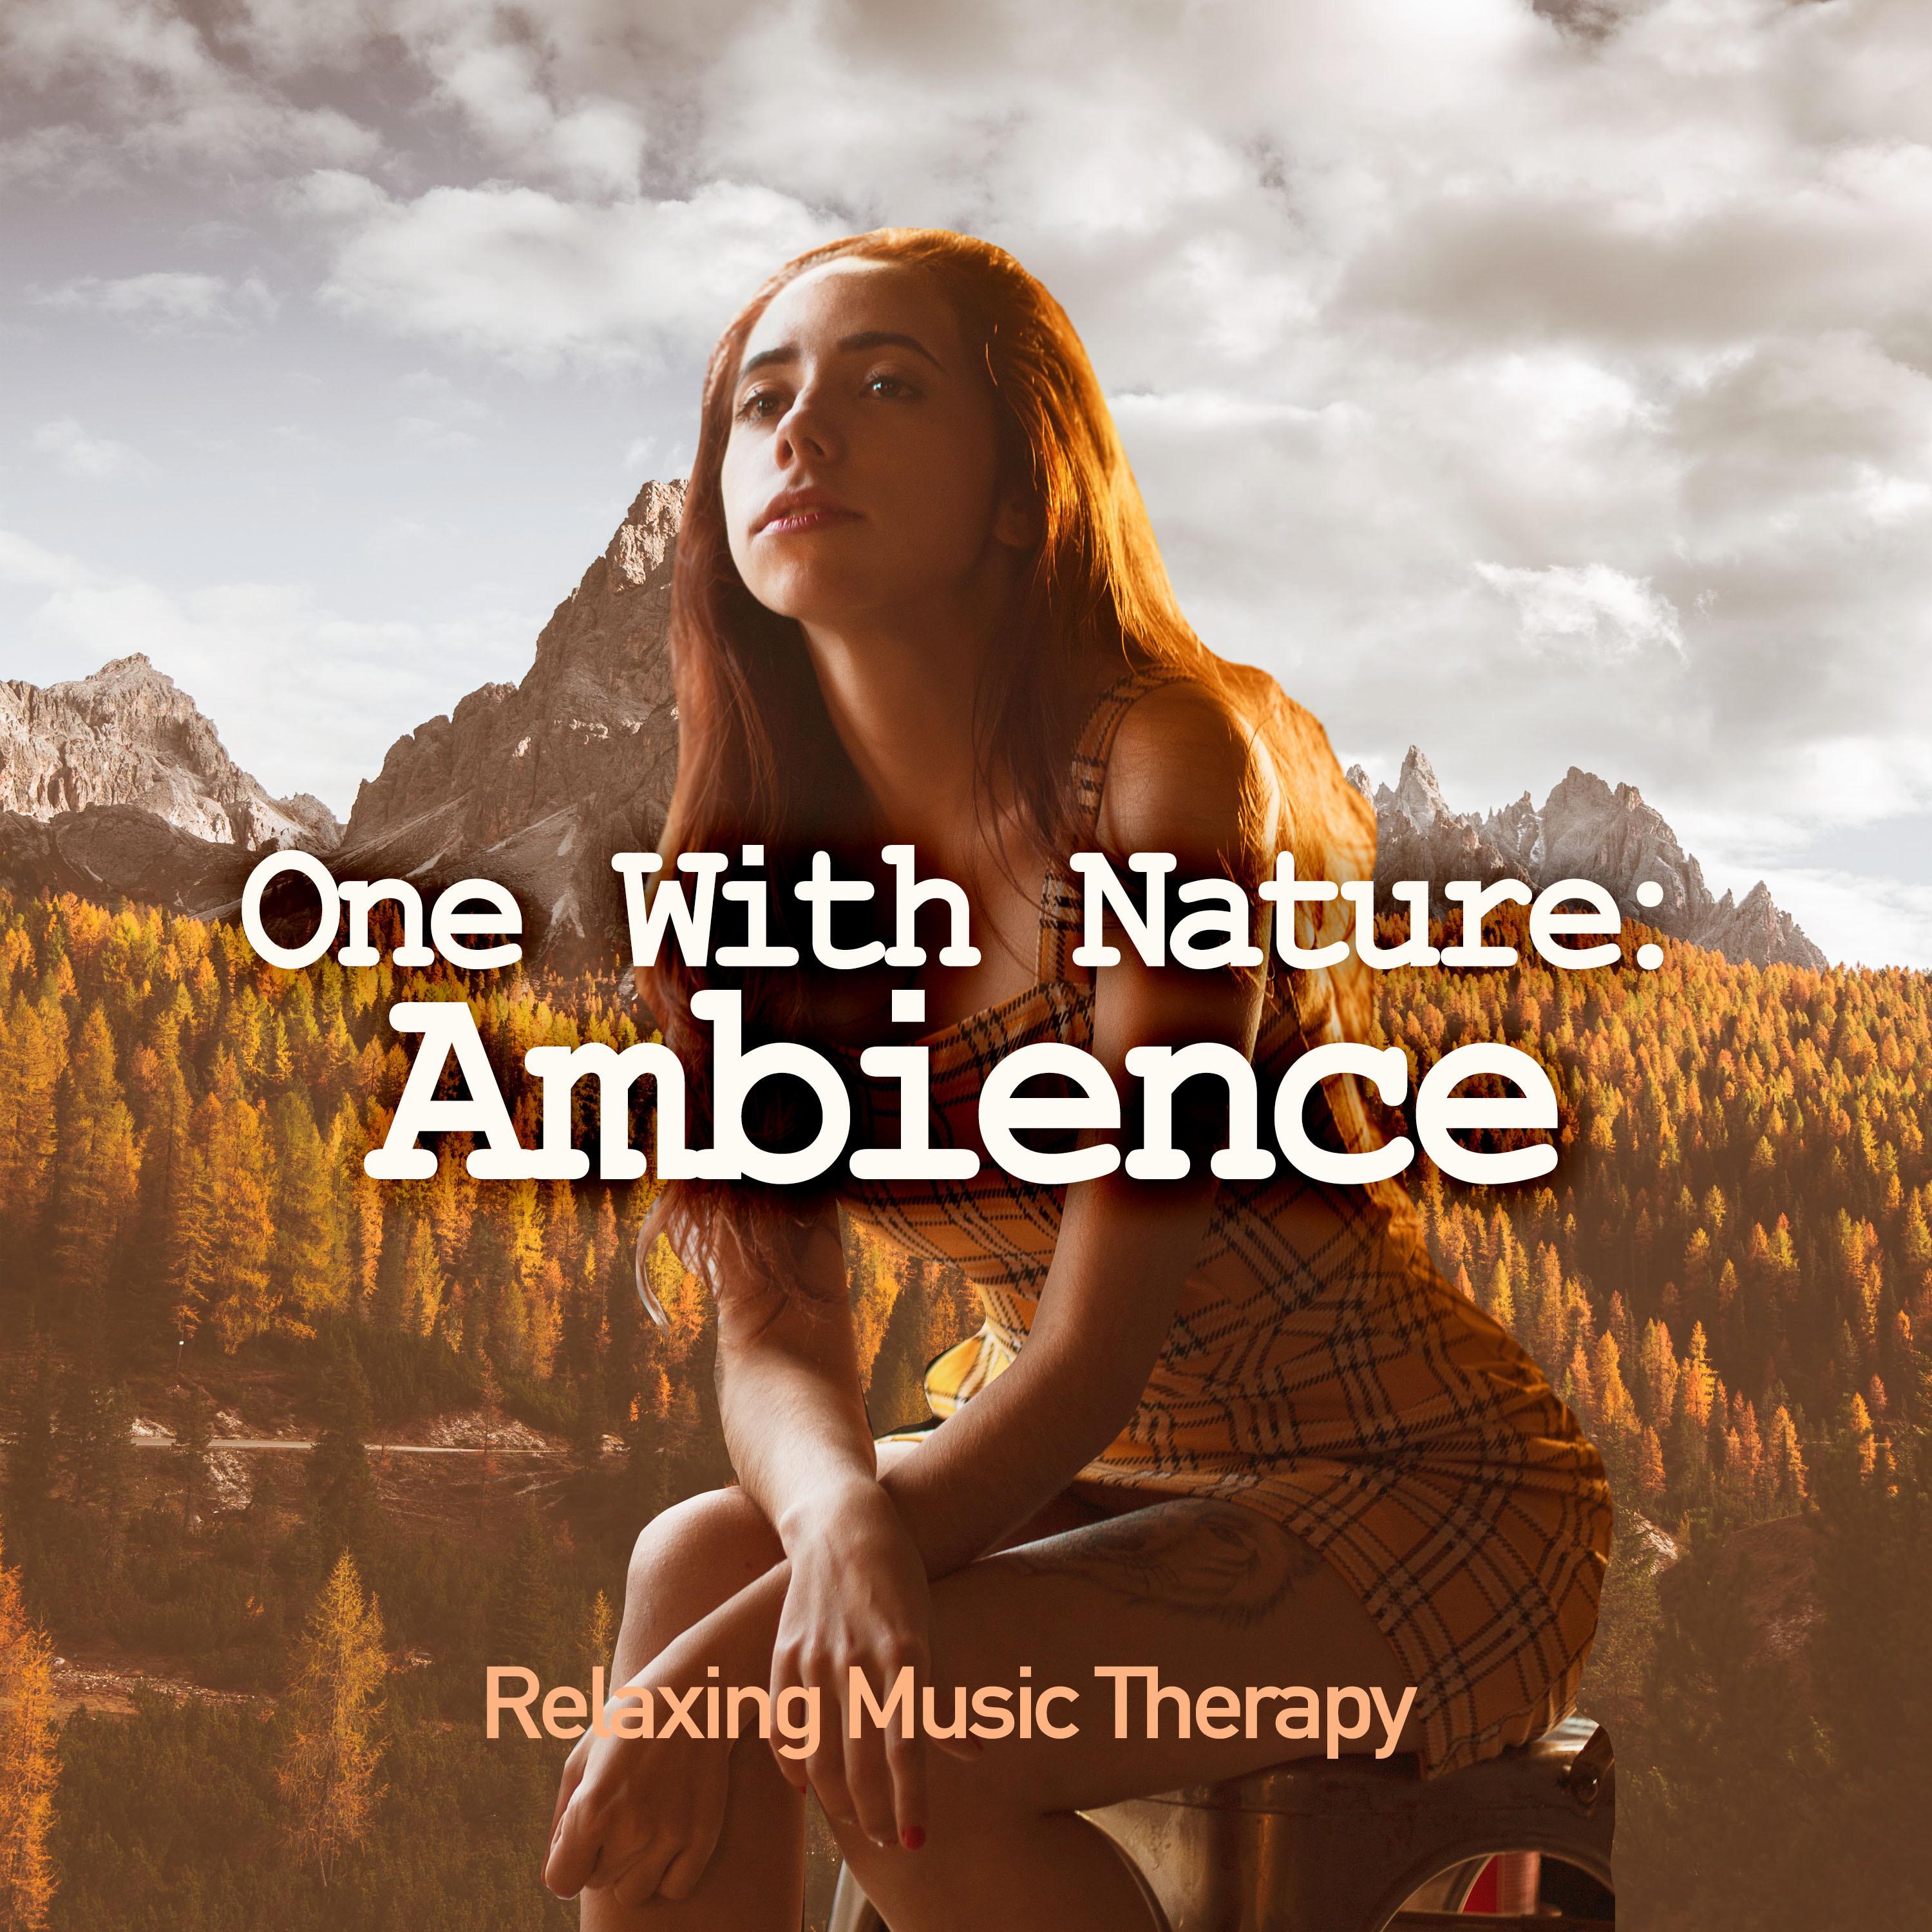 One With Nature: Ambience